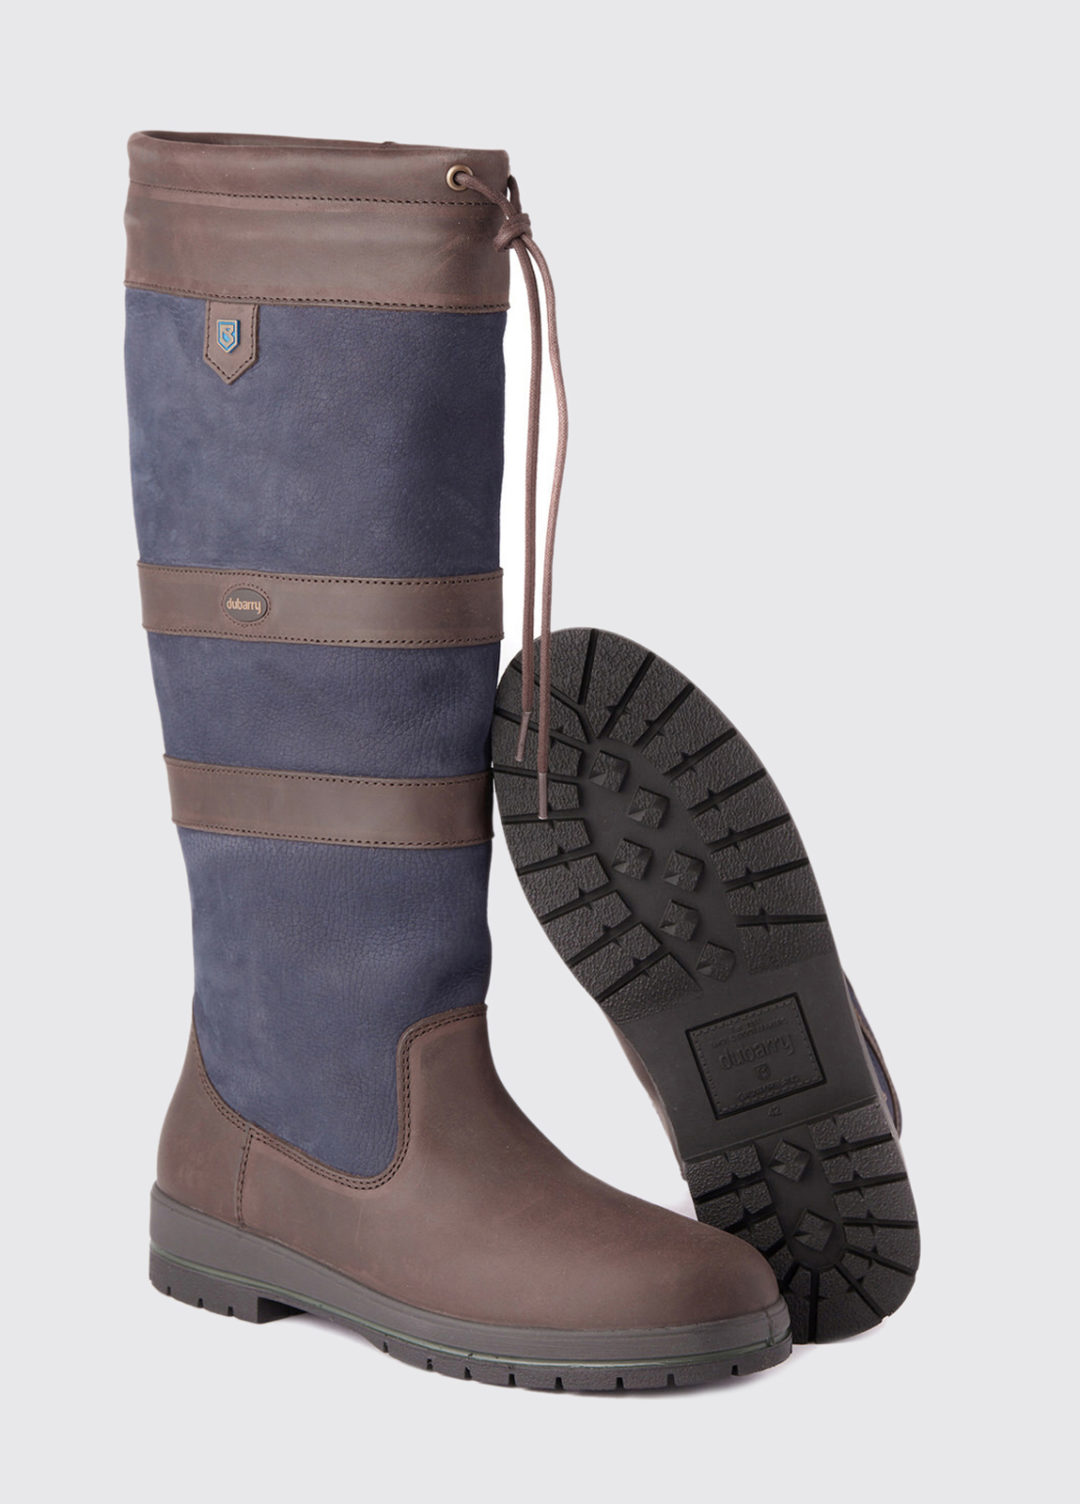 Dubarry Galway ExtraFit™ Country Boot